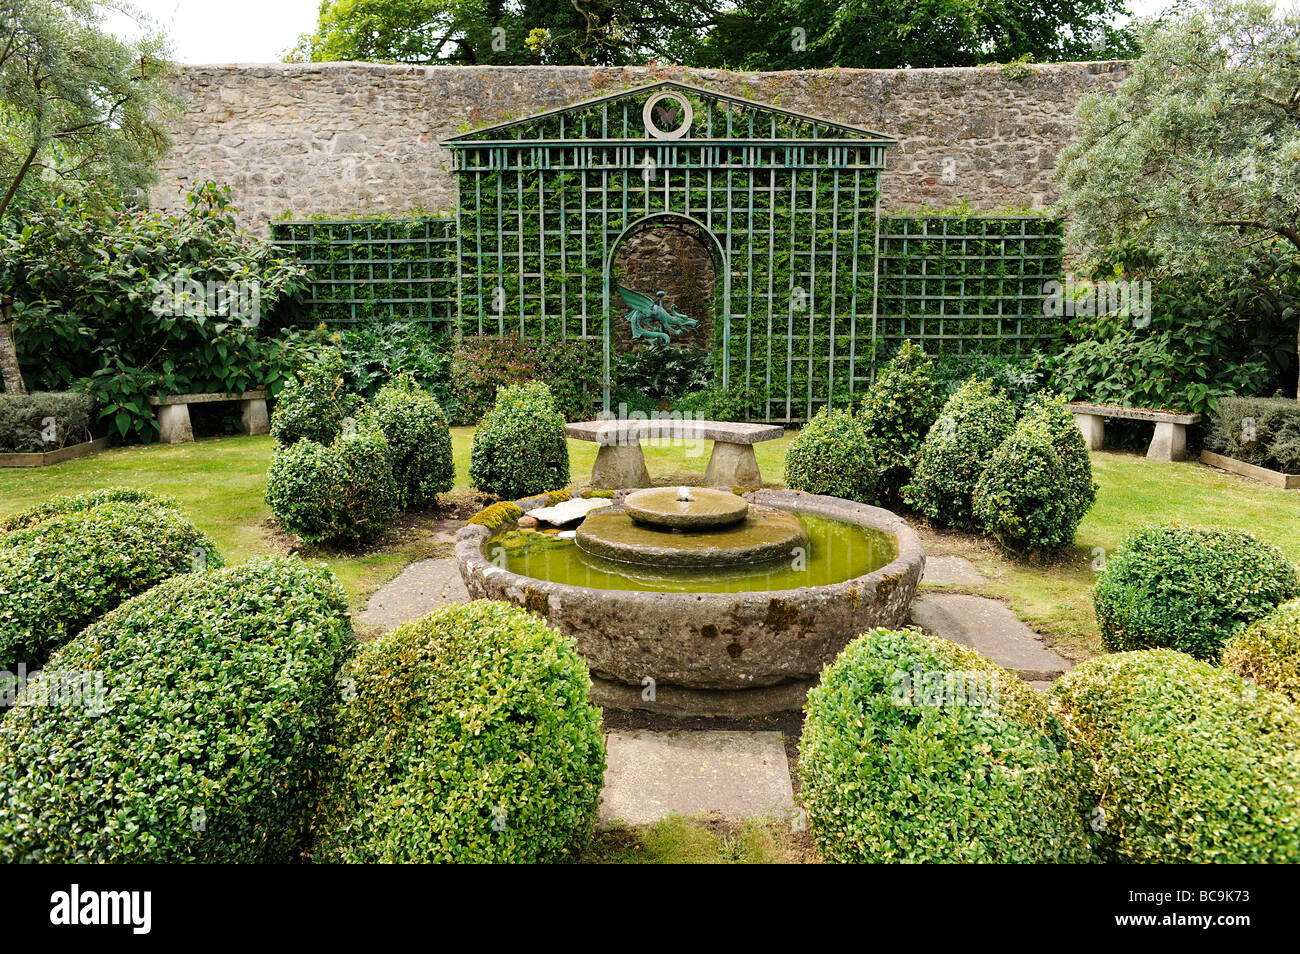 Trellis with boxed hedges and water feature in an English Garden in Somerset, UK Stock Photo